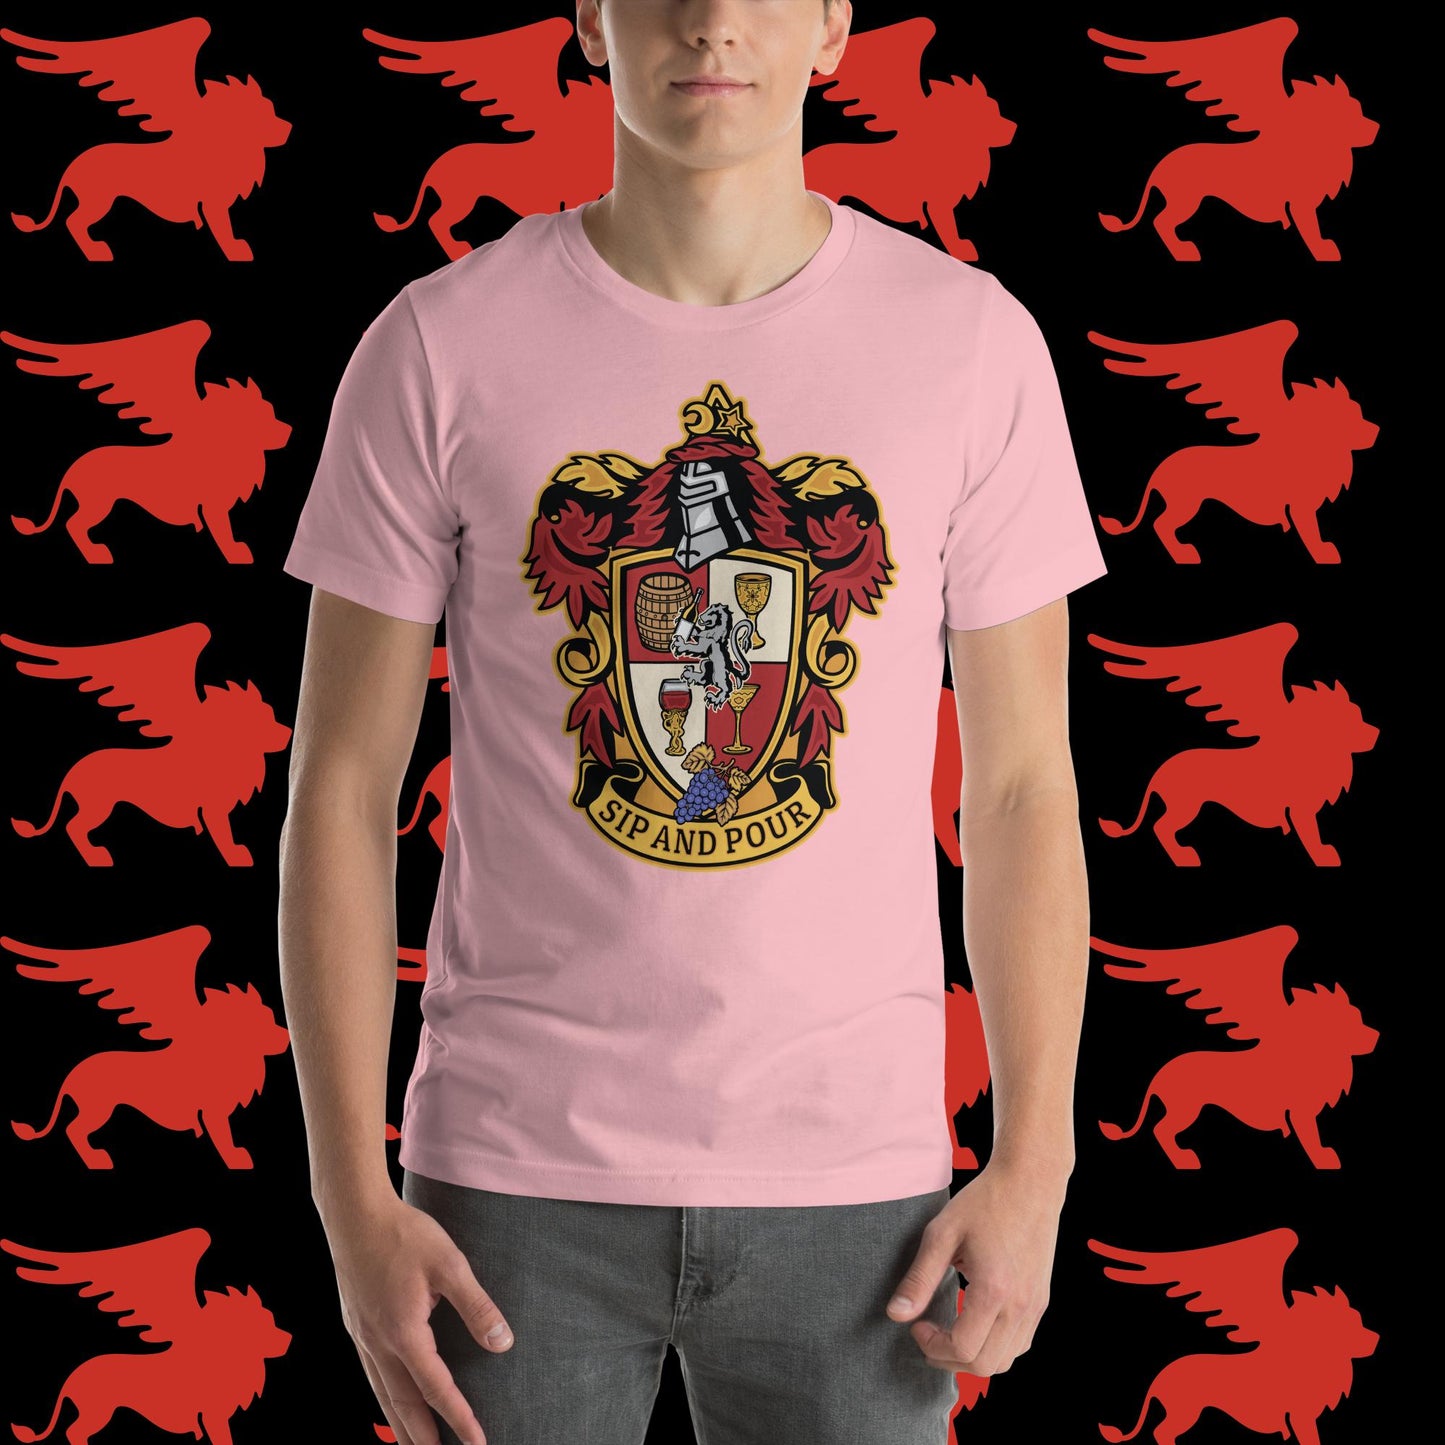 Parry Hotter - House of Sip and Pour - Sorcerer Shirt